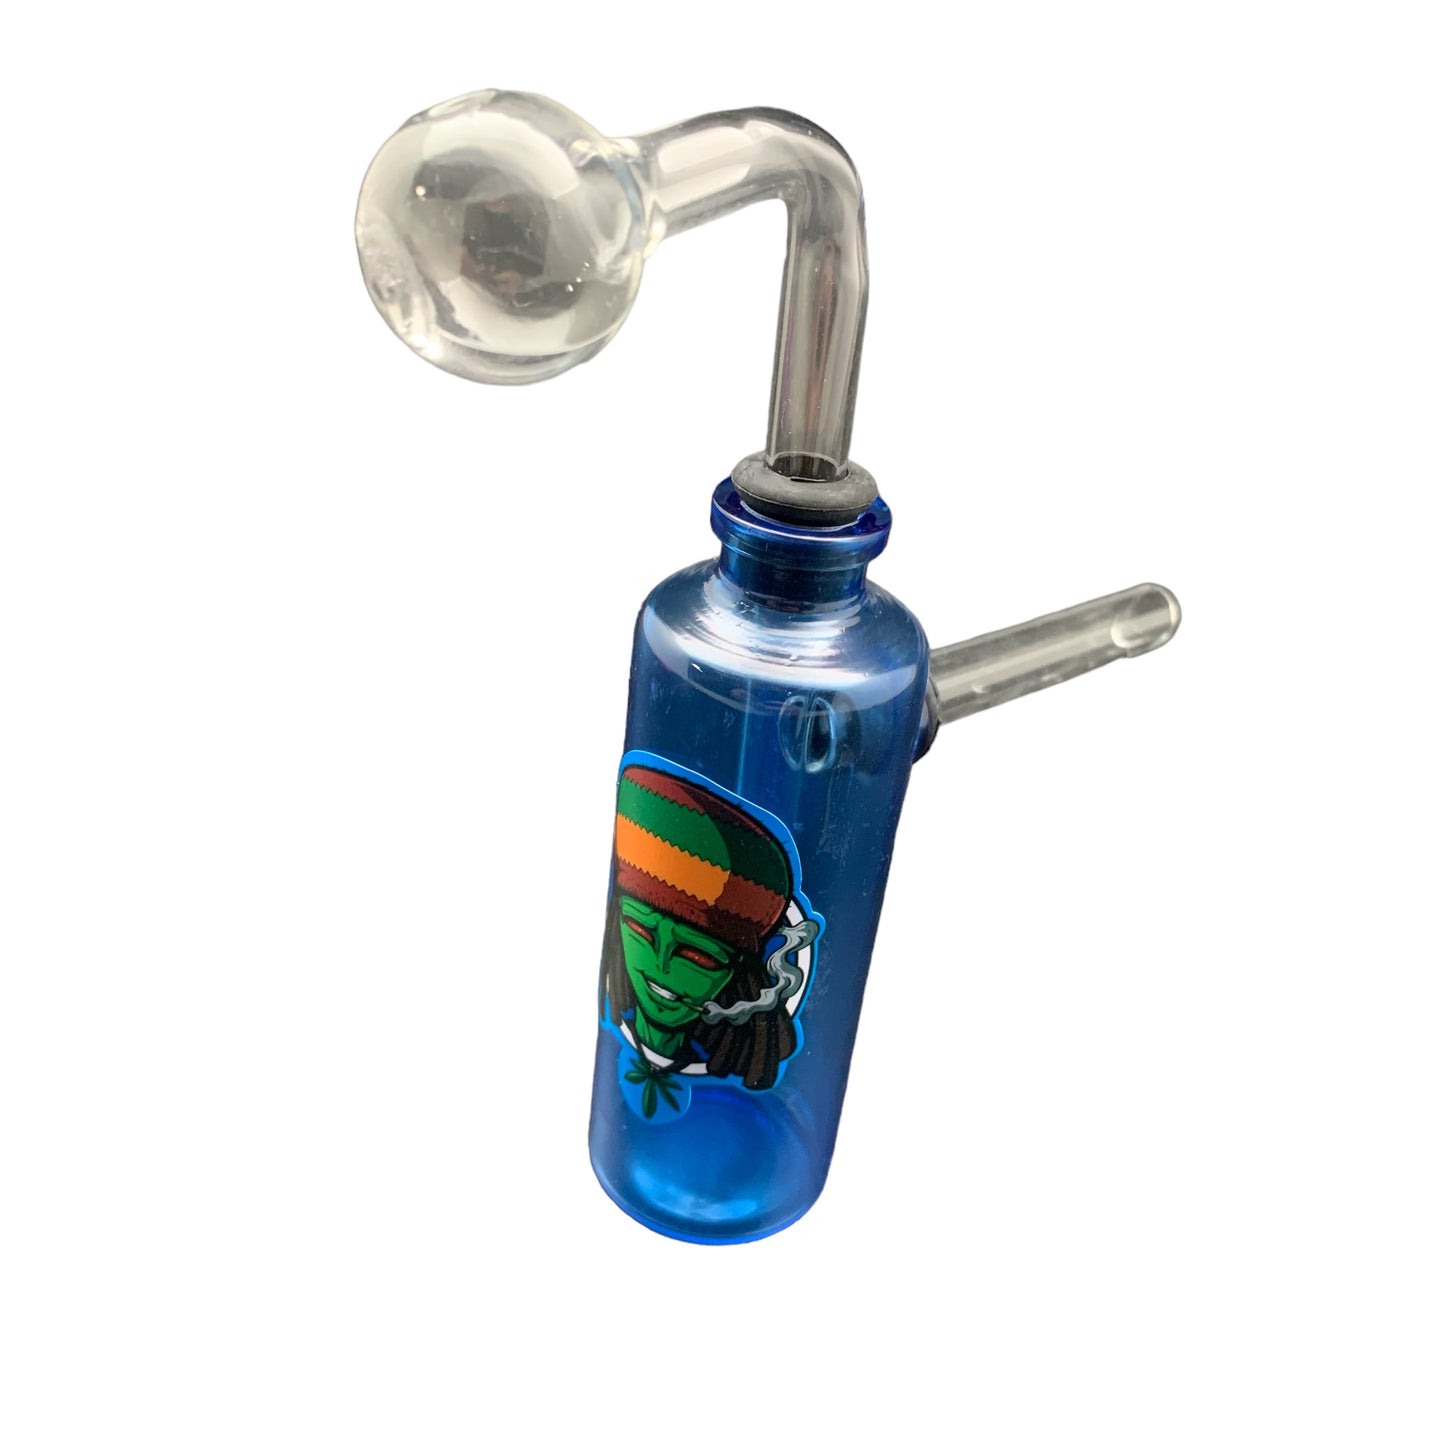 3 Piece Oil Burner Water Pipe (Options Available) (B2B)